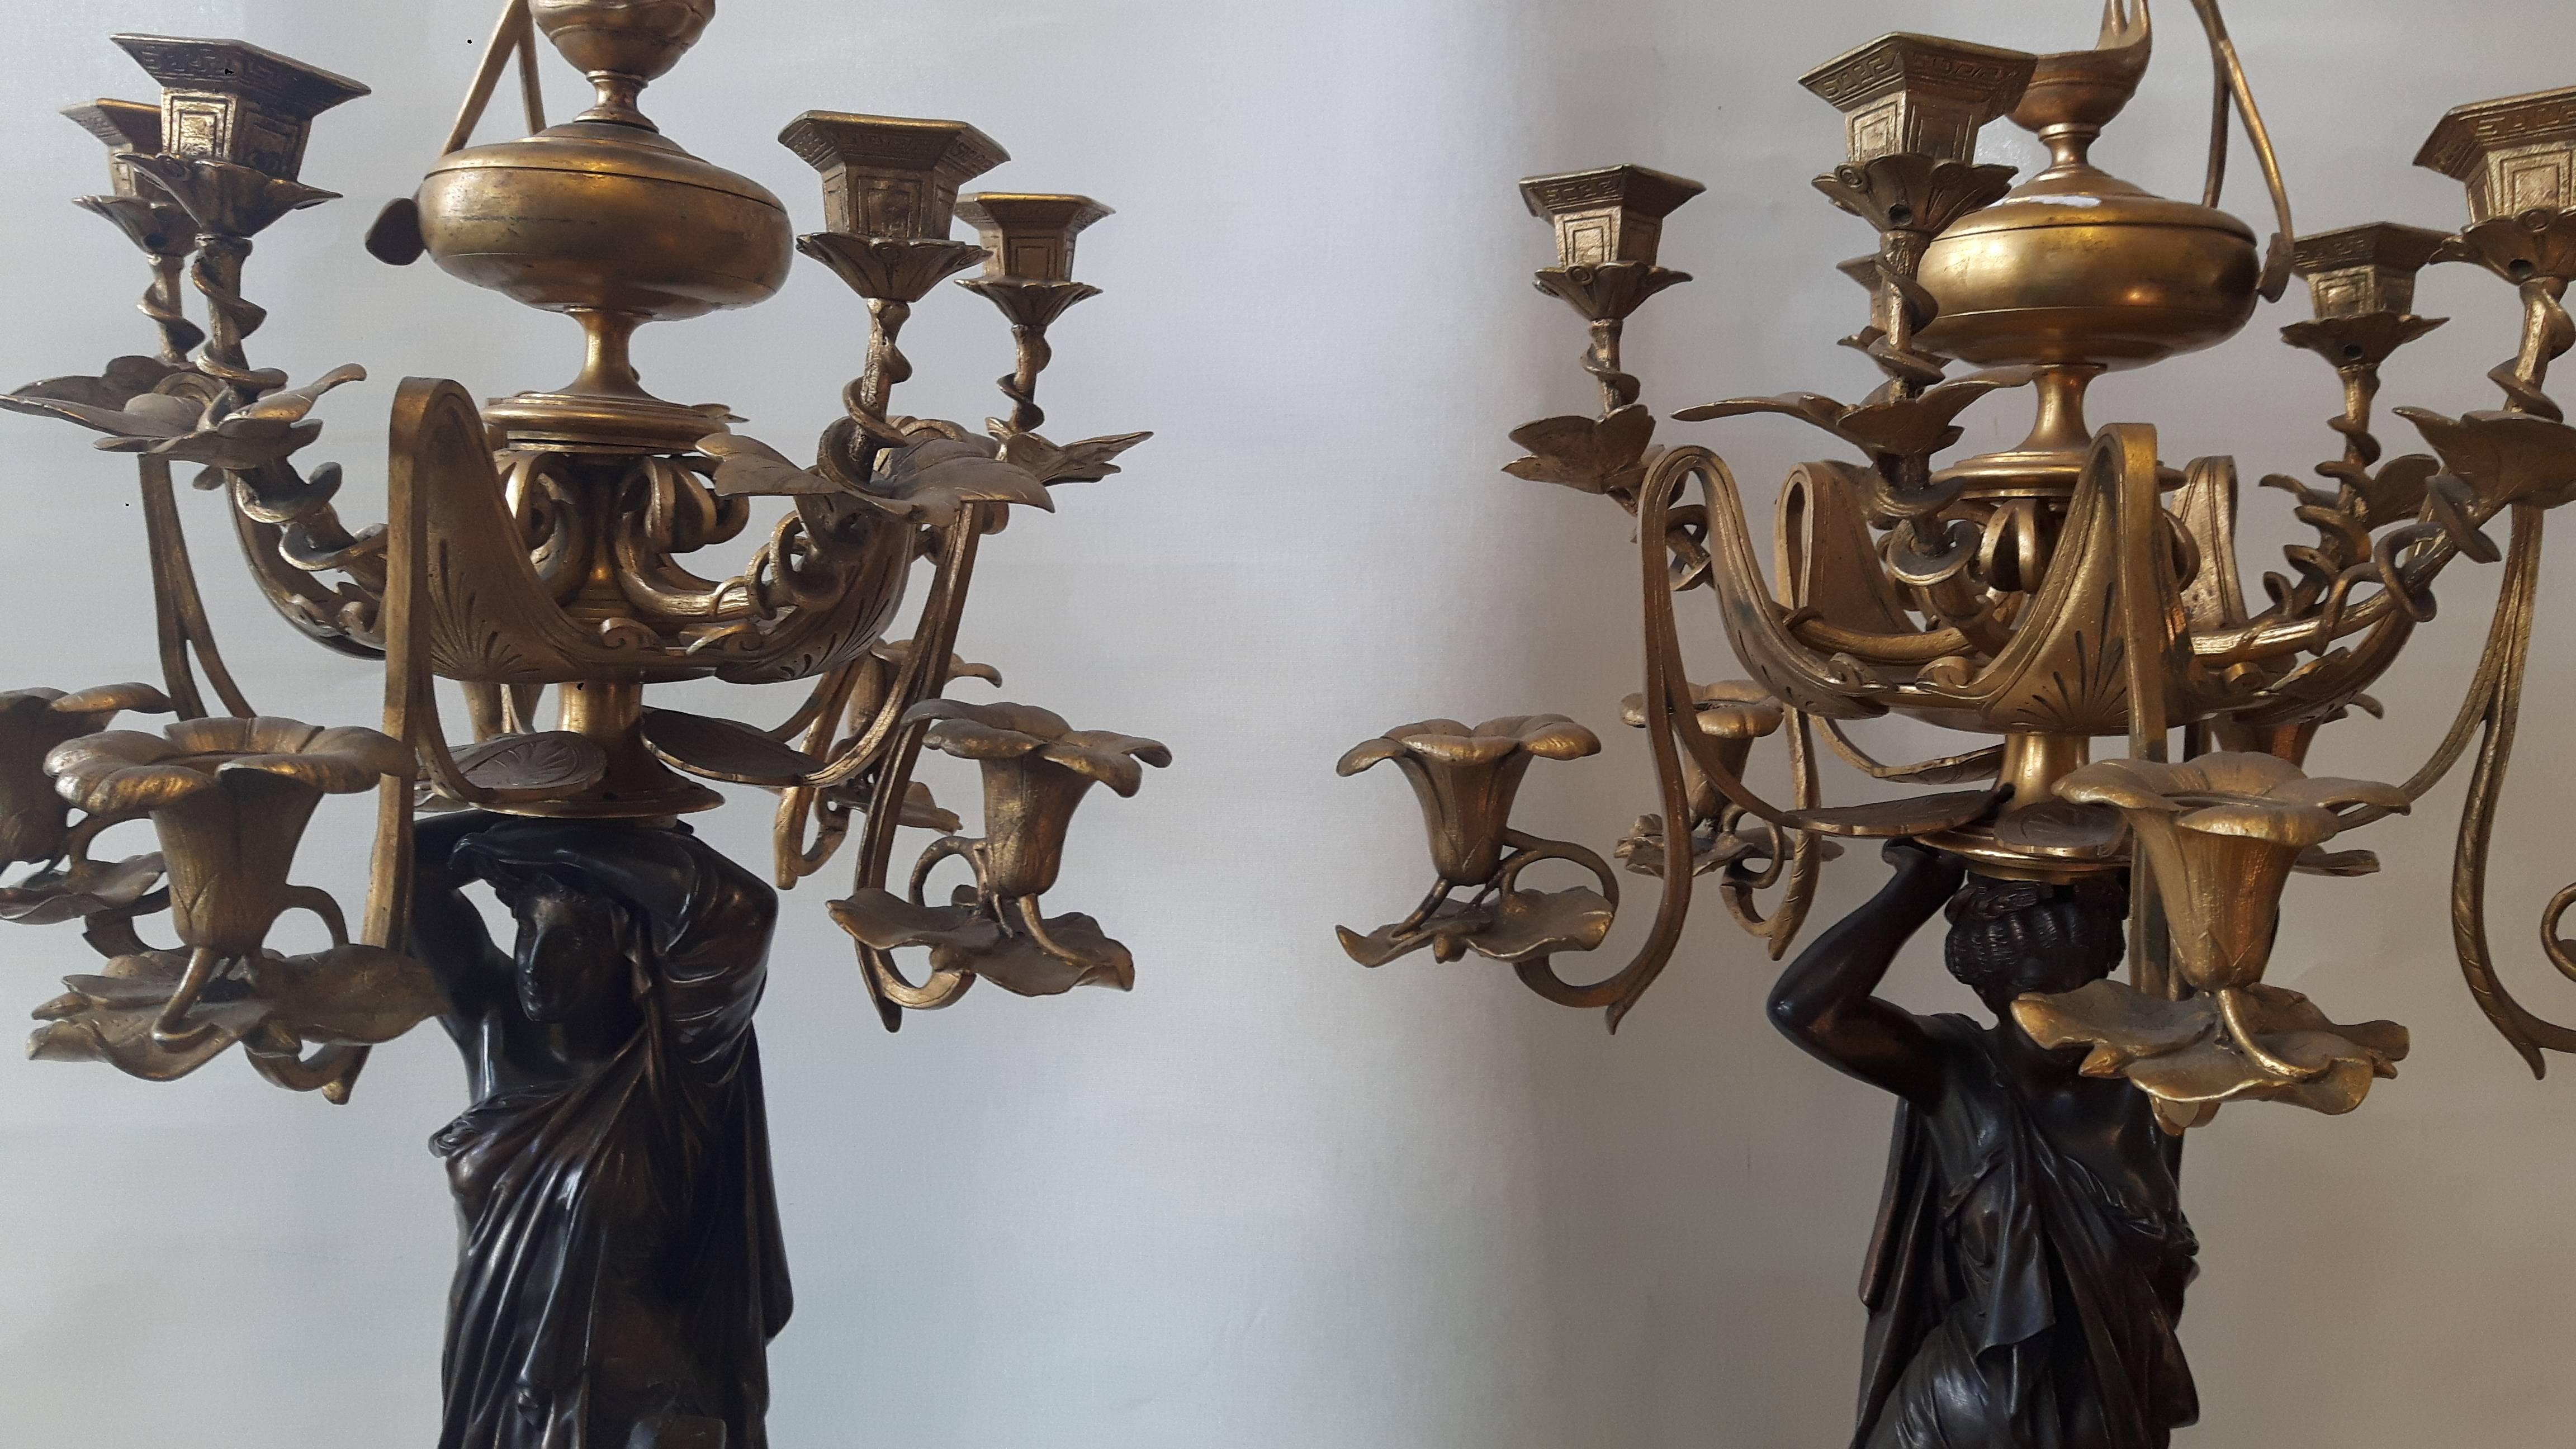 Napoleon III Unusual Pair of 19th Century French Candelabras For Sale